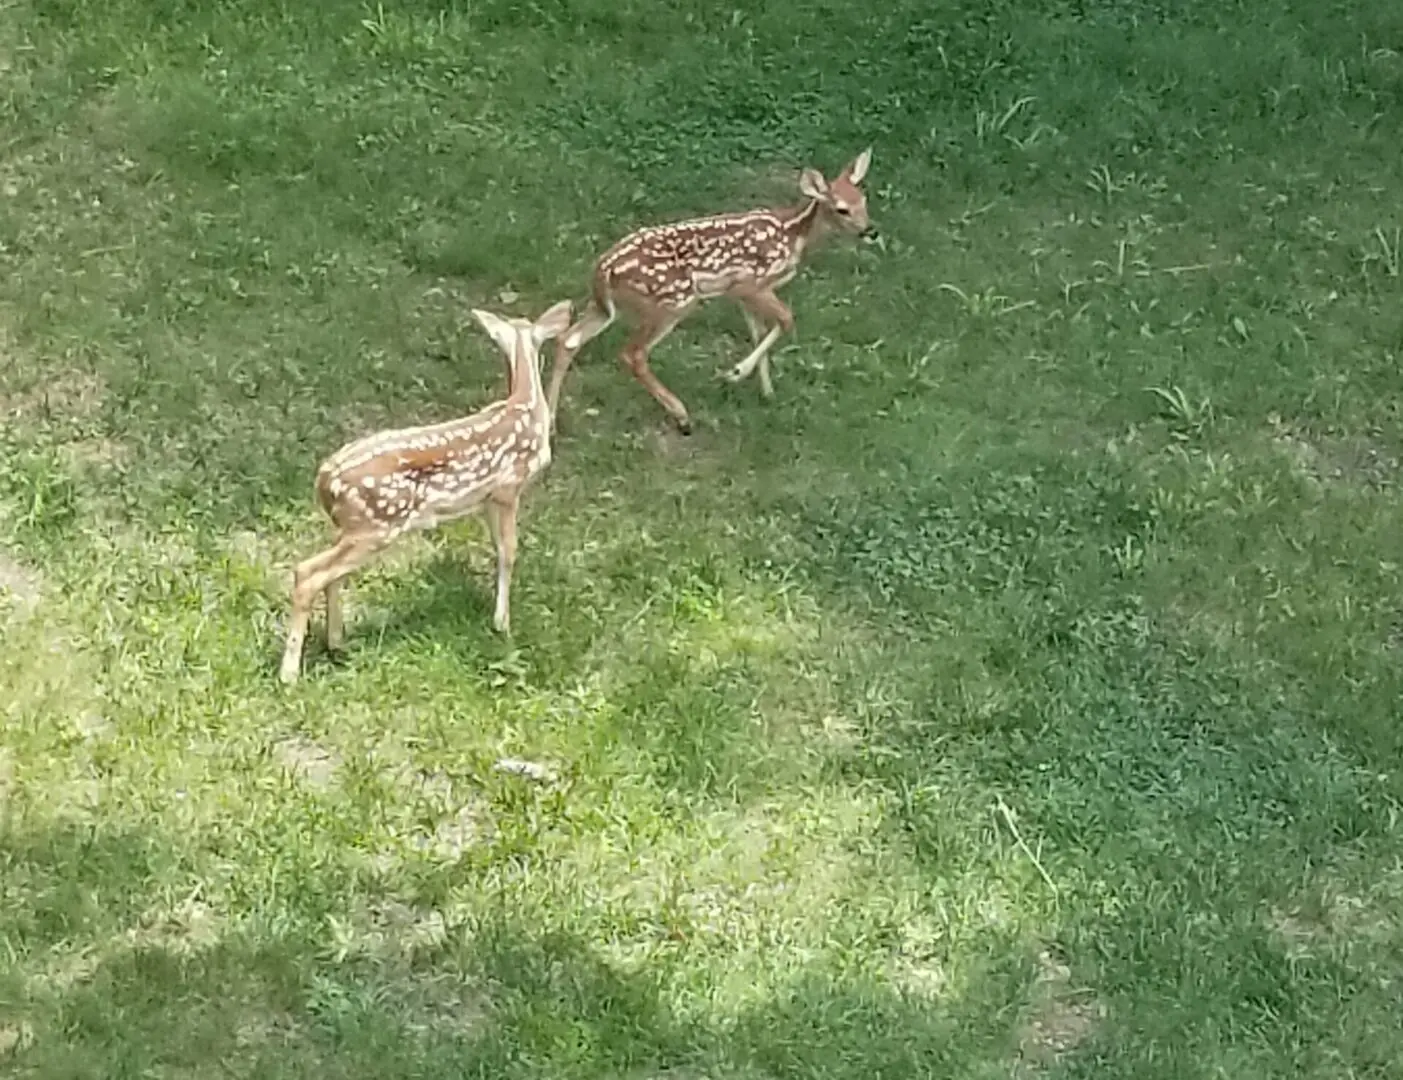 Two fawns